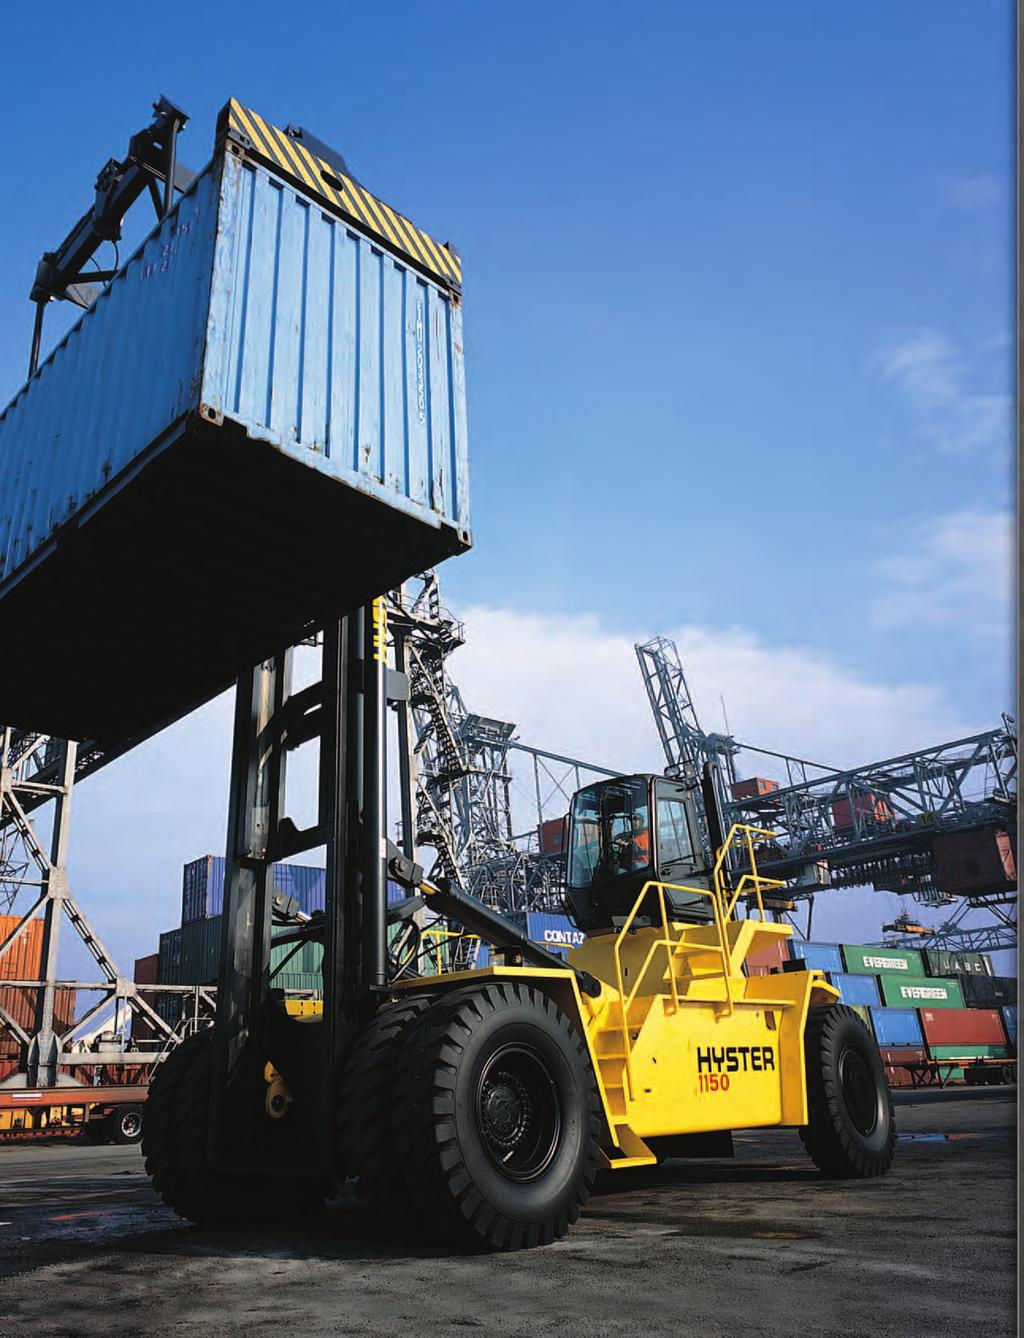 HYSTER CONTAINER HANDLING Since the beginning of the trend to containerization, Hyster Company has played a leading role in developing handling equipment.